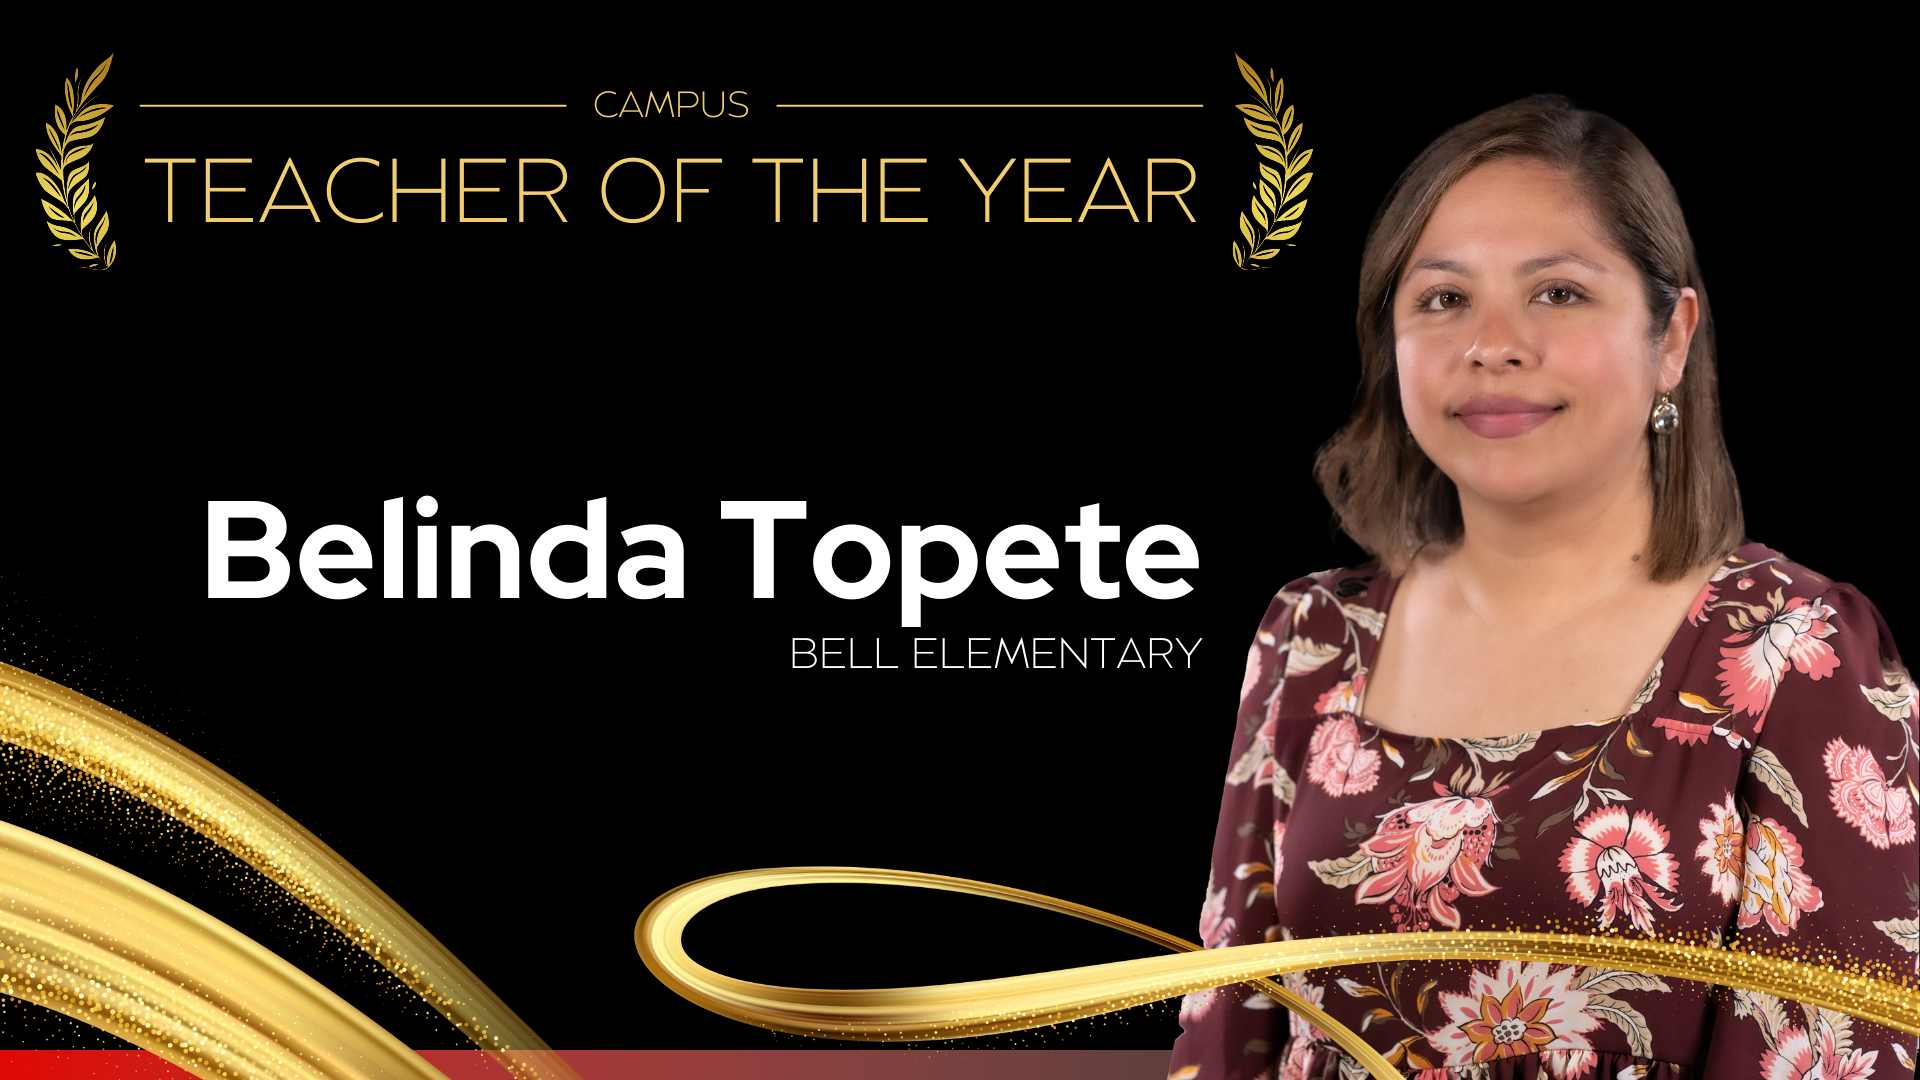 Campus Teacher of the Year Belinda Topete - bell Elementary